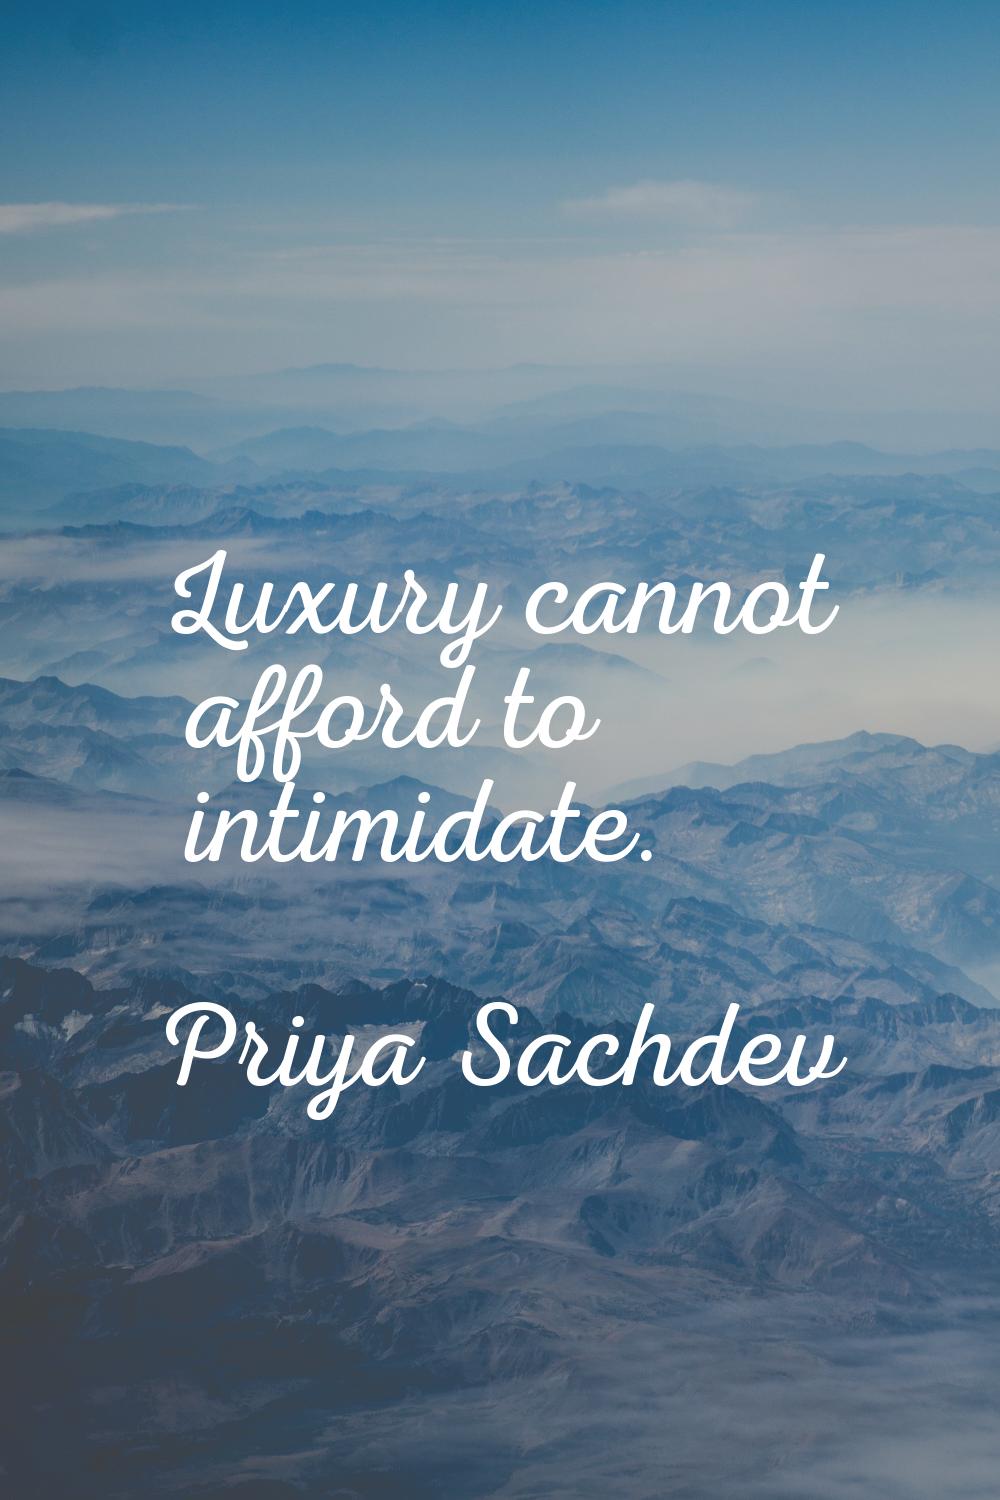 Luxury cannot afford to intimidate.